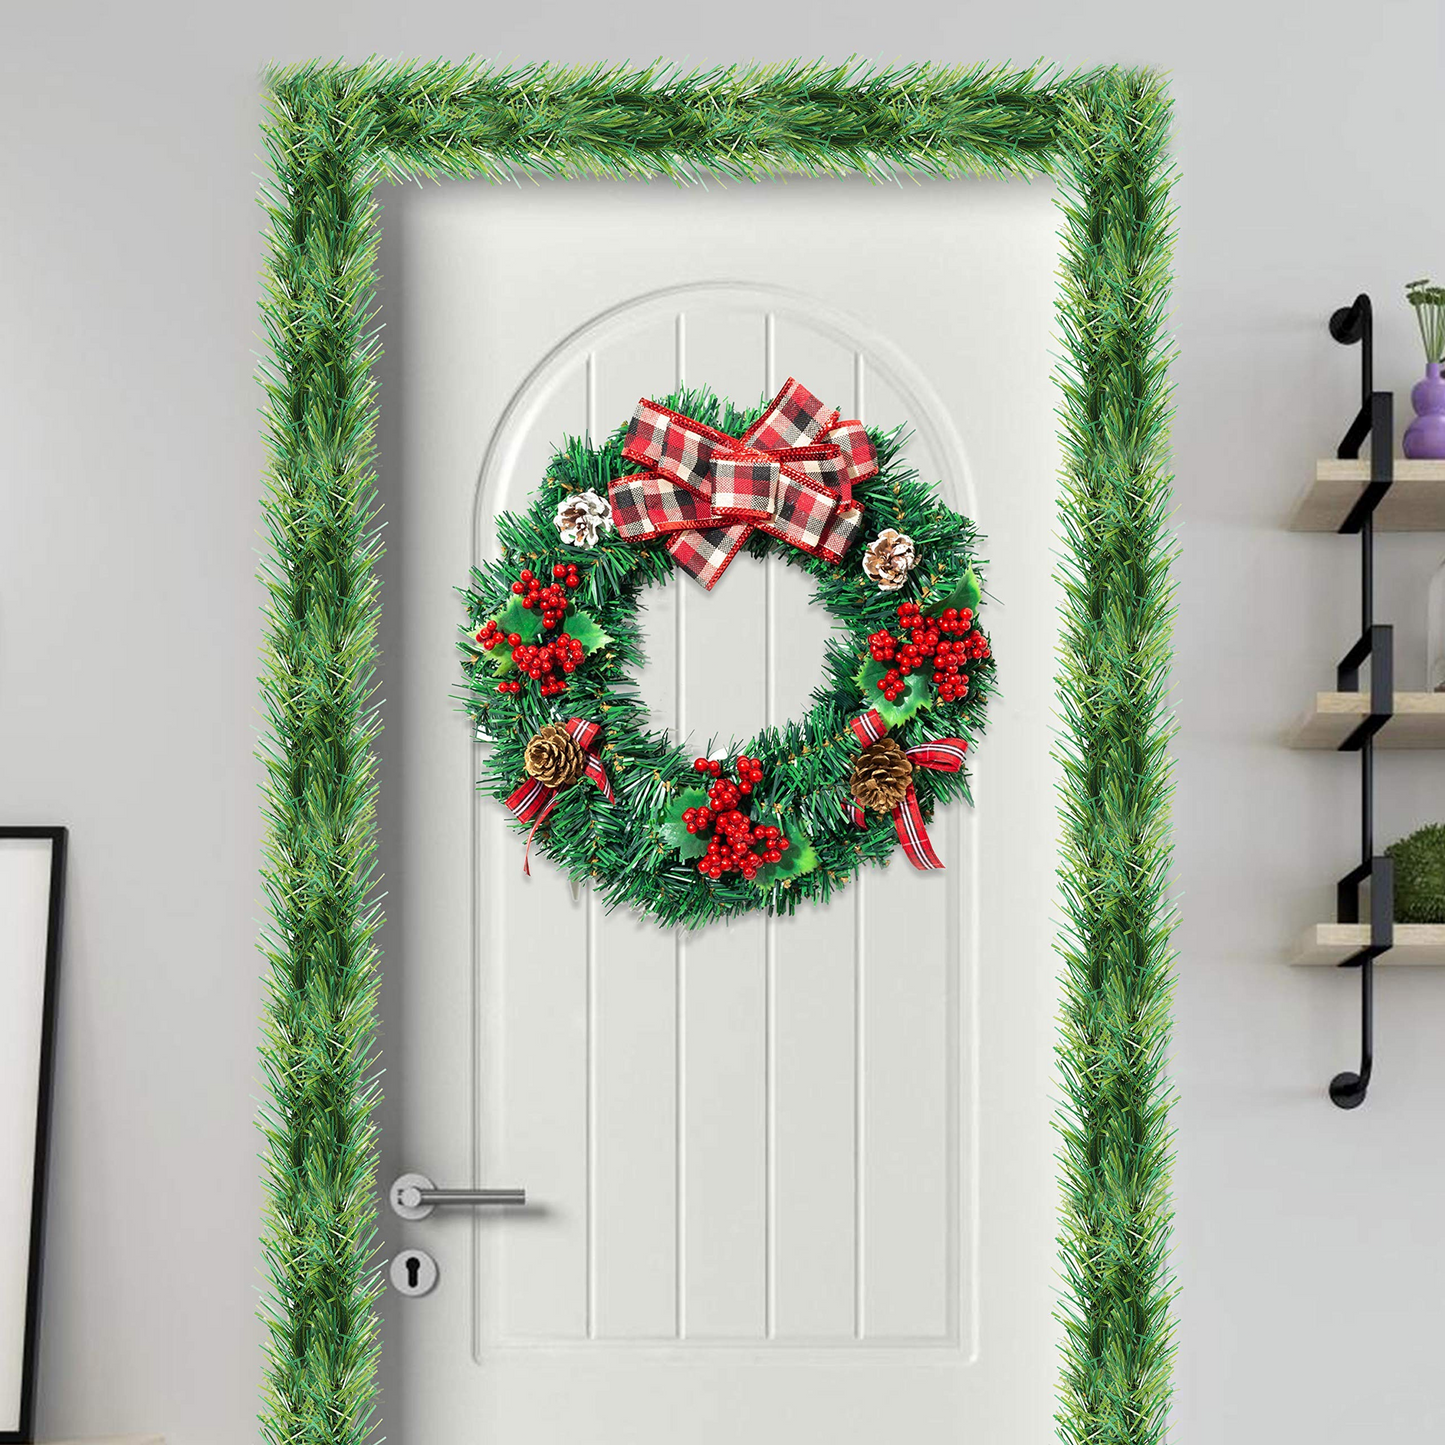 Green Holiday Garland, 1 Pack (50 ft)